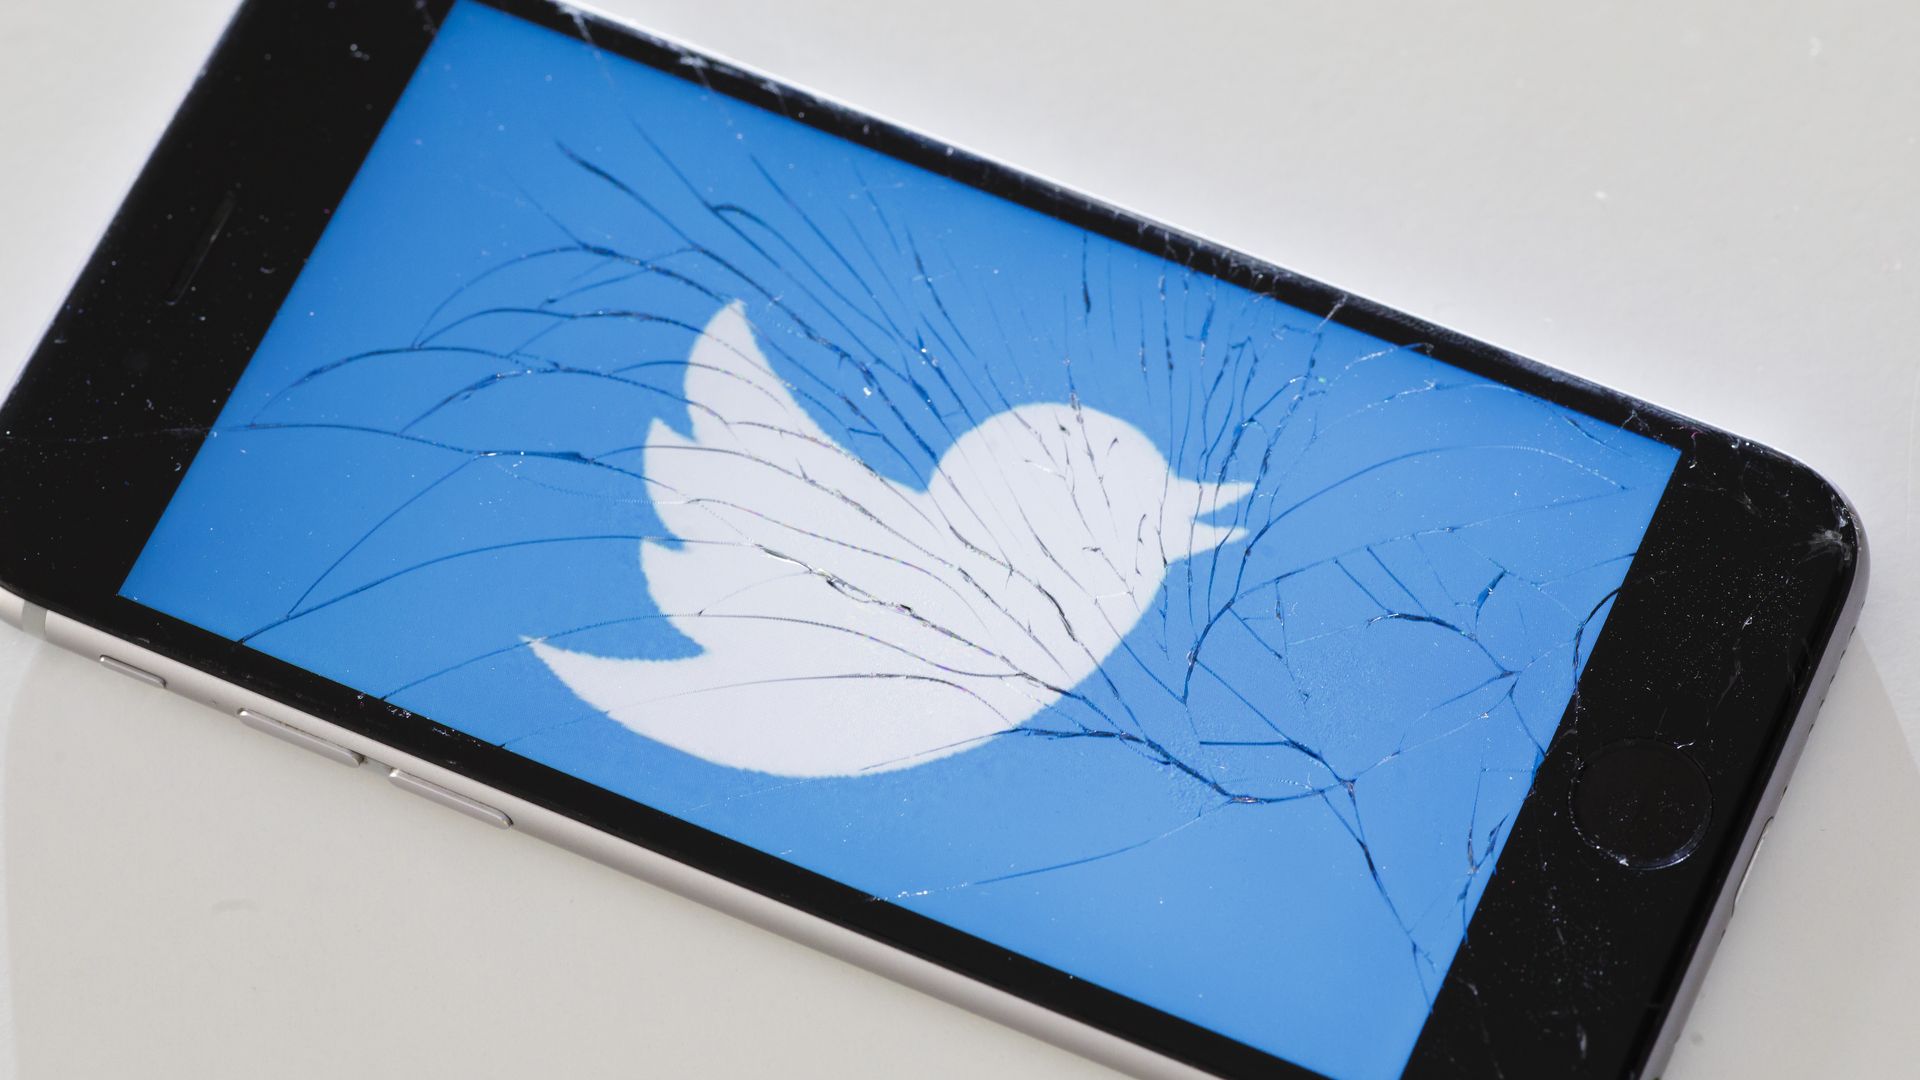 A Twitter logo appears on an iPhone with a cracked screen.